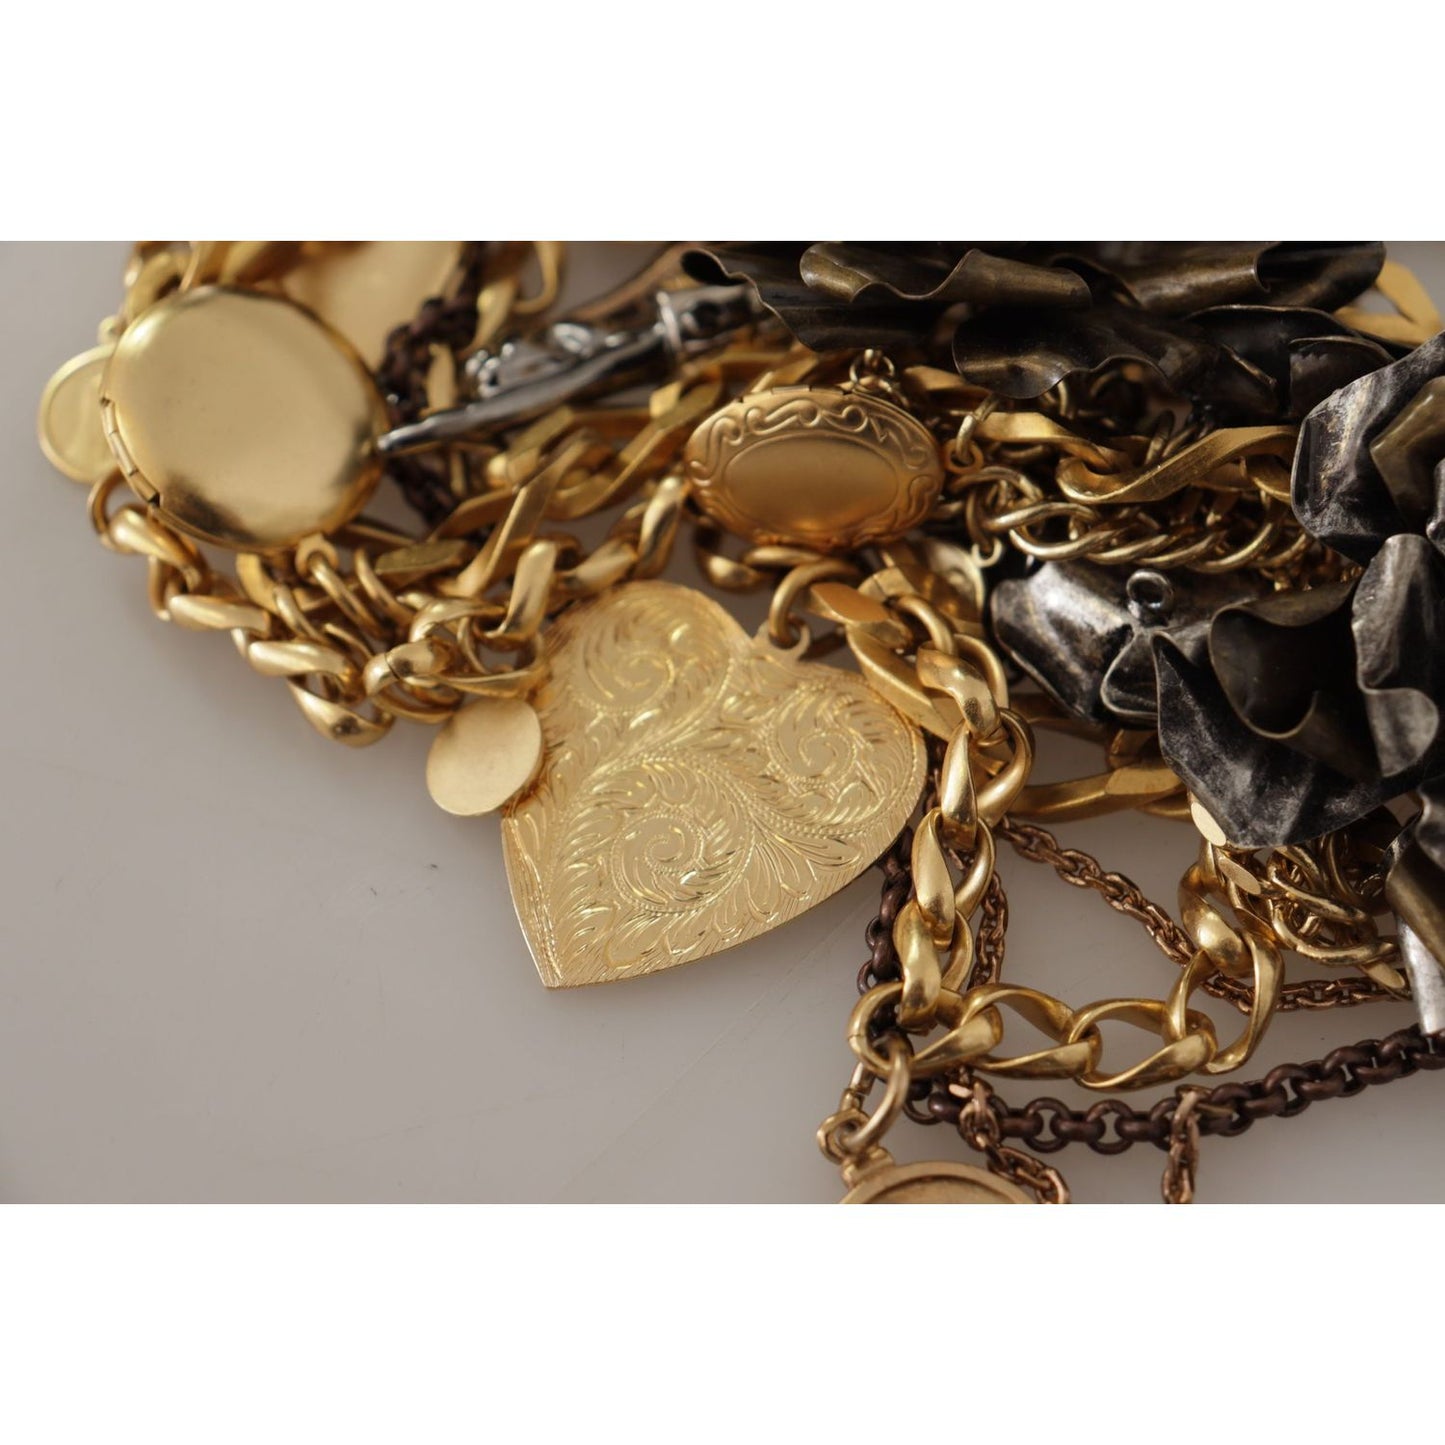 Dolce & Gabbana Sicilian Glamour Gold Statement Necklace gold-brass-sicily-charm-heart-statement-necklace WOMAN NECKLACE IMG_3834-scaled-5f349668-e59.jpg